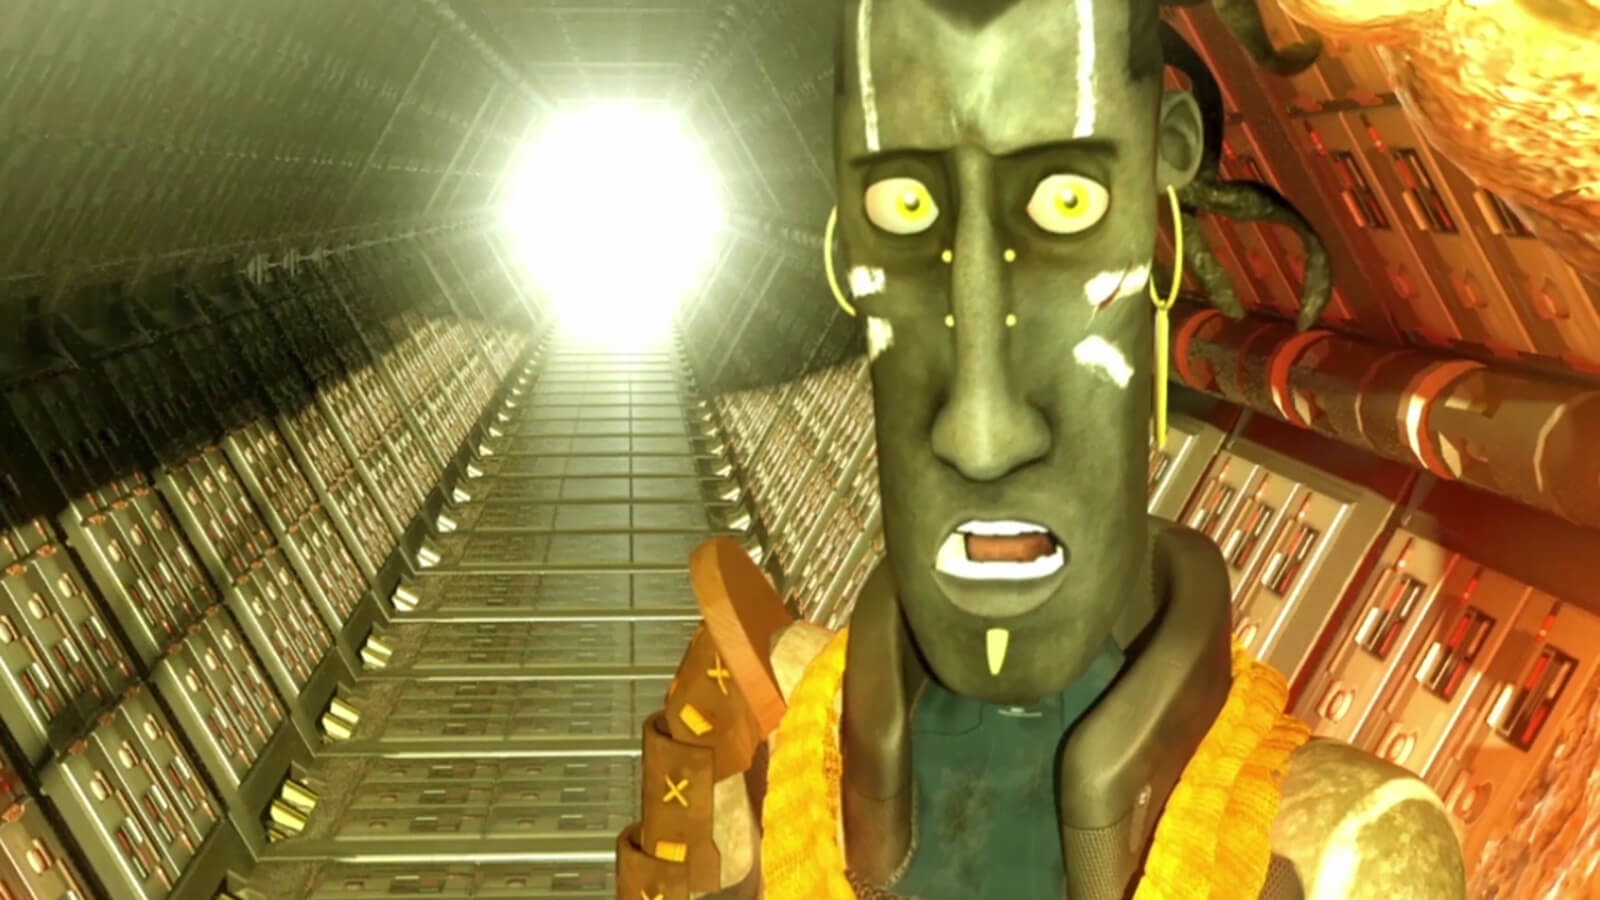 A man with a thin vertical face decorated with white body paint looks surprised staring down a hexagonal metal corridor